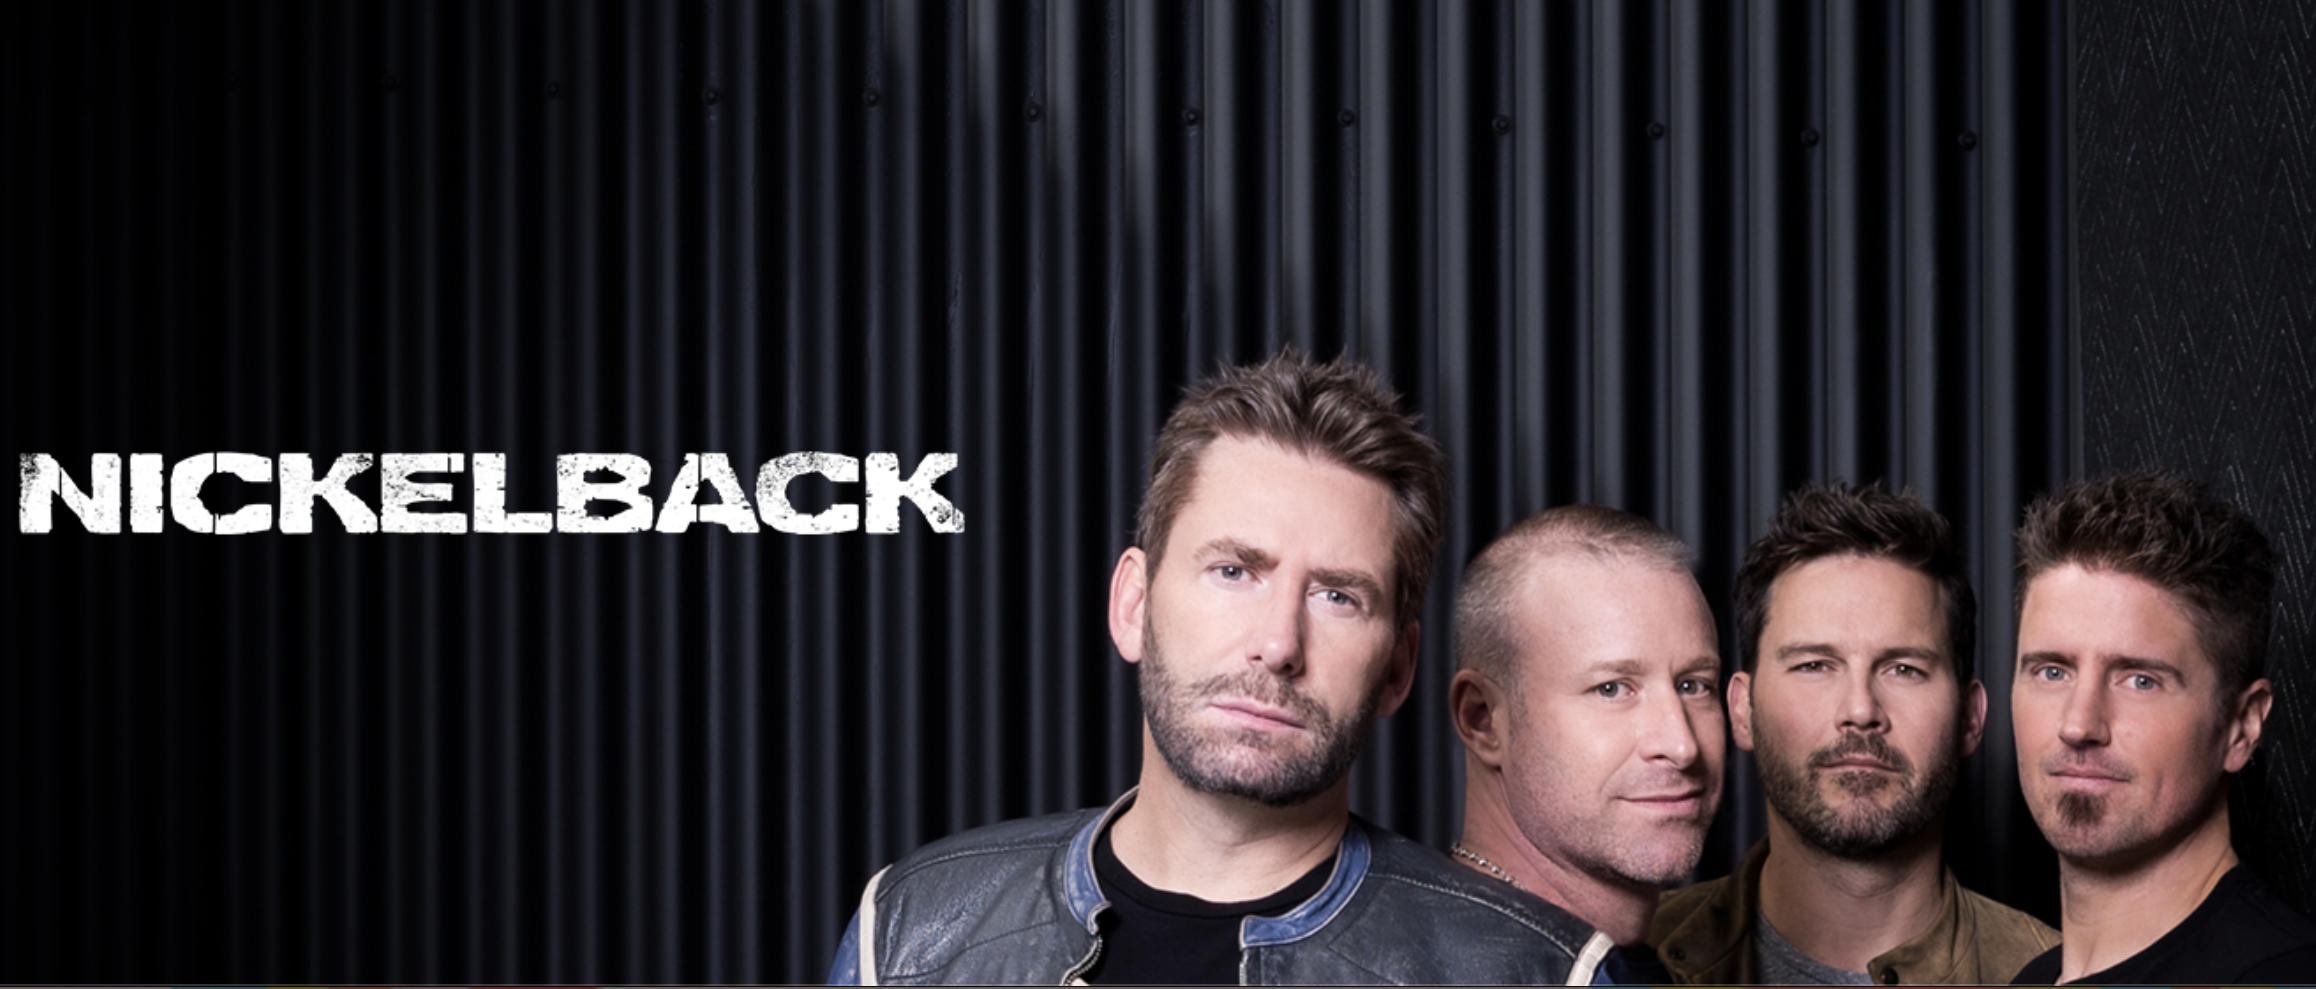 when does the new nickelback album come out